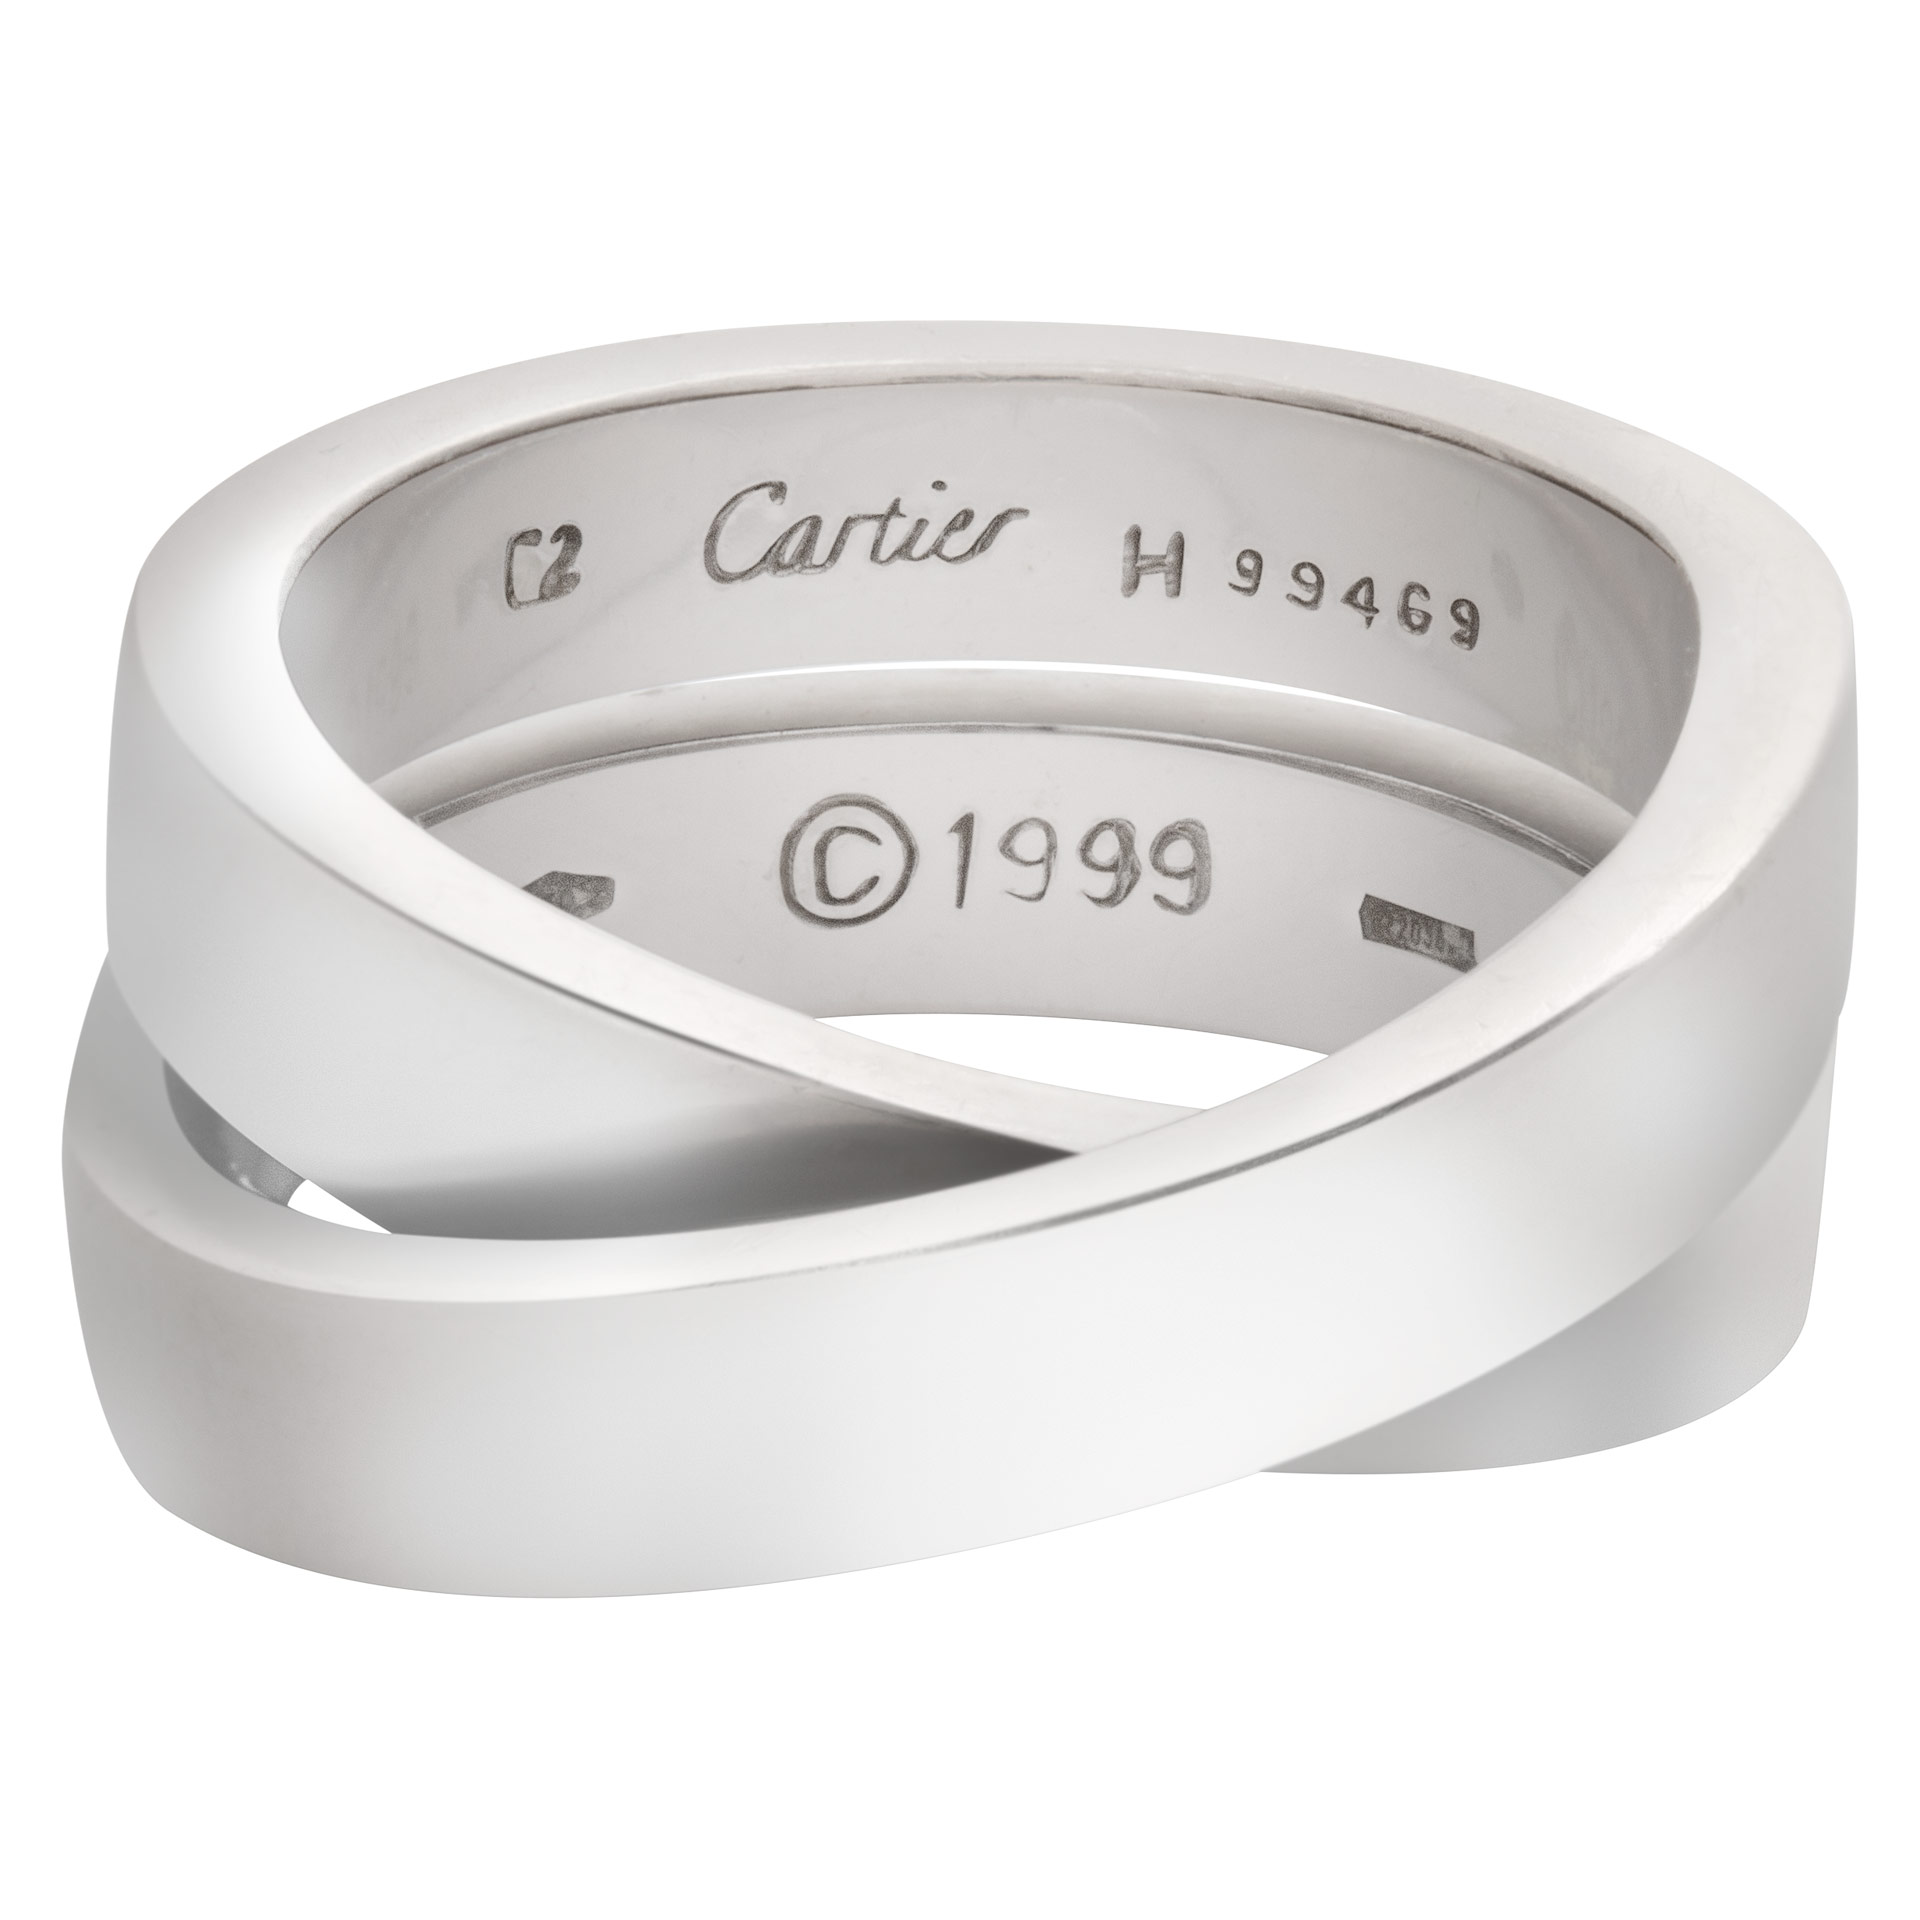 Cartier Crossover ring in 18k white 